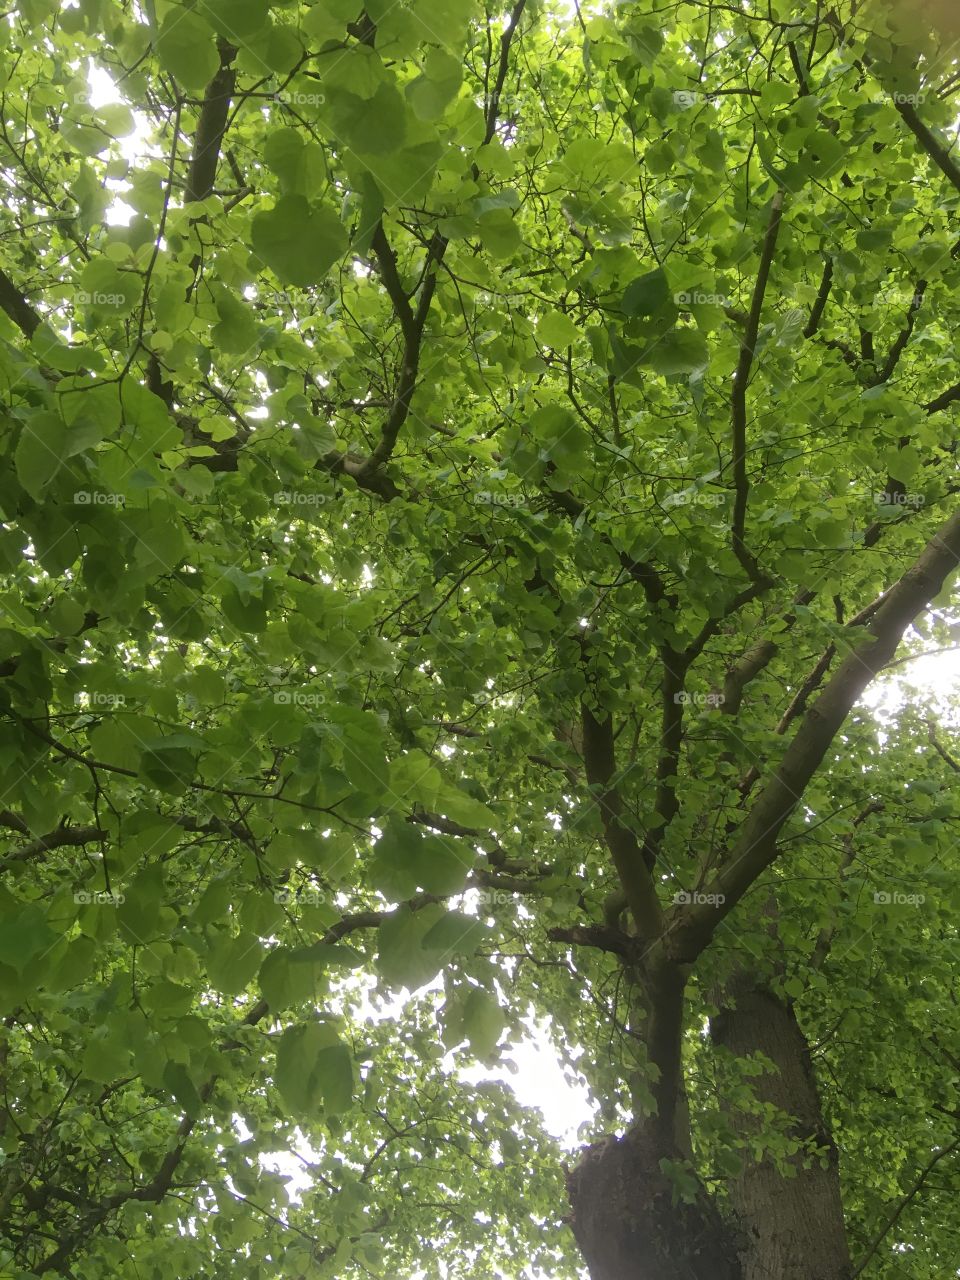 View looking up through the twisting branches of a beech tree, in full vibrant green leaf 